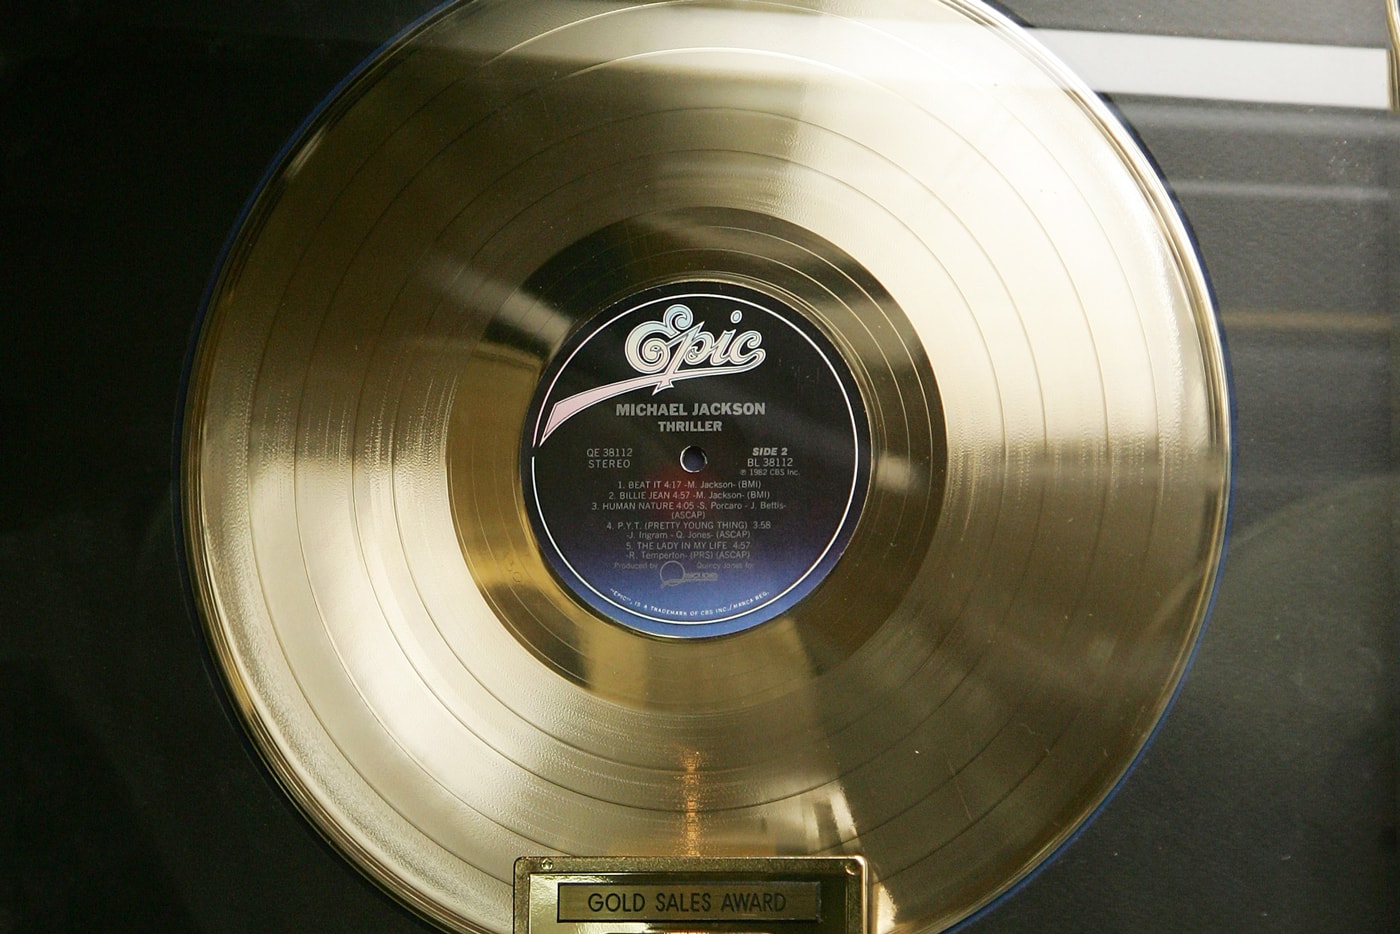 RIAA Adds Music Streaming to Platinum and Gold Certifications